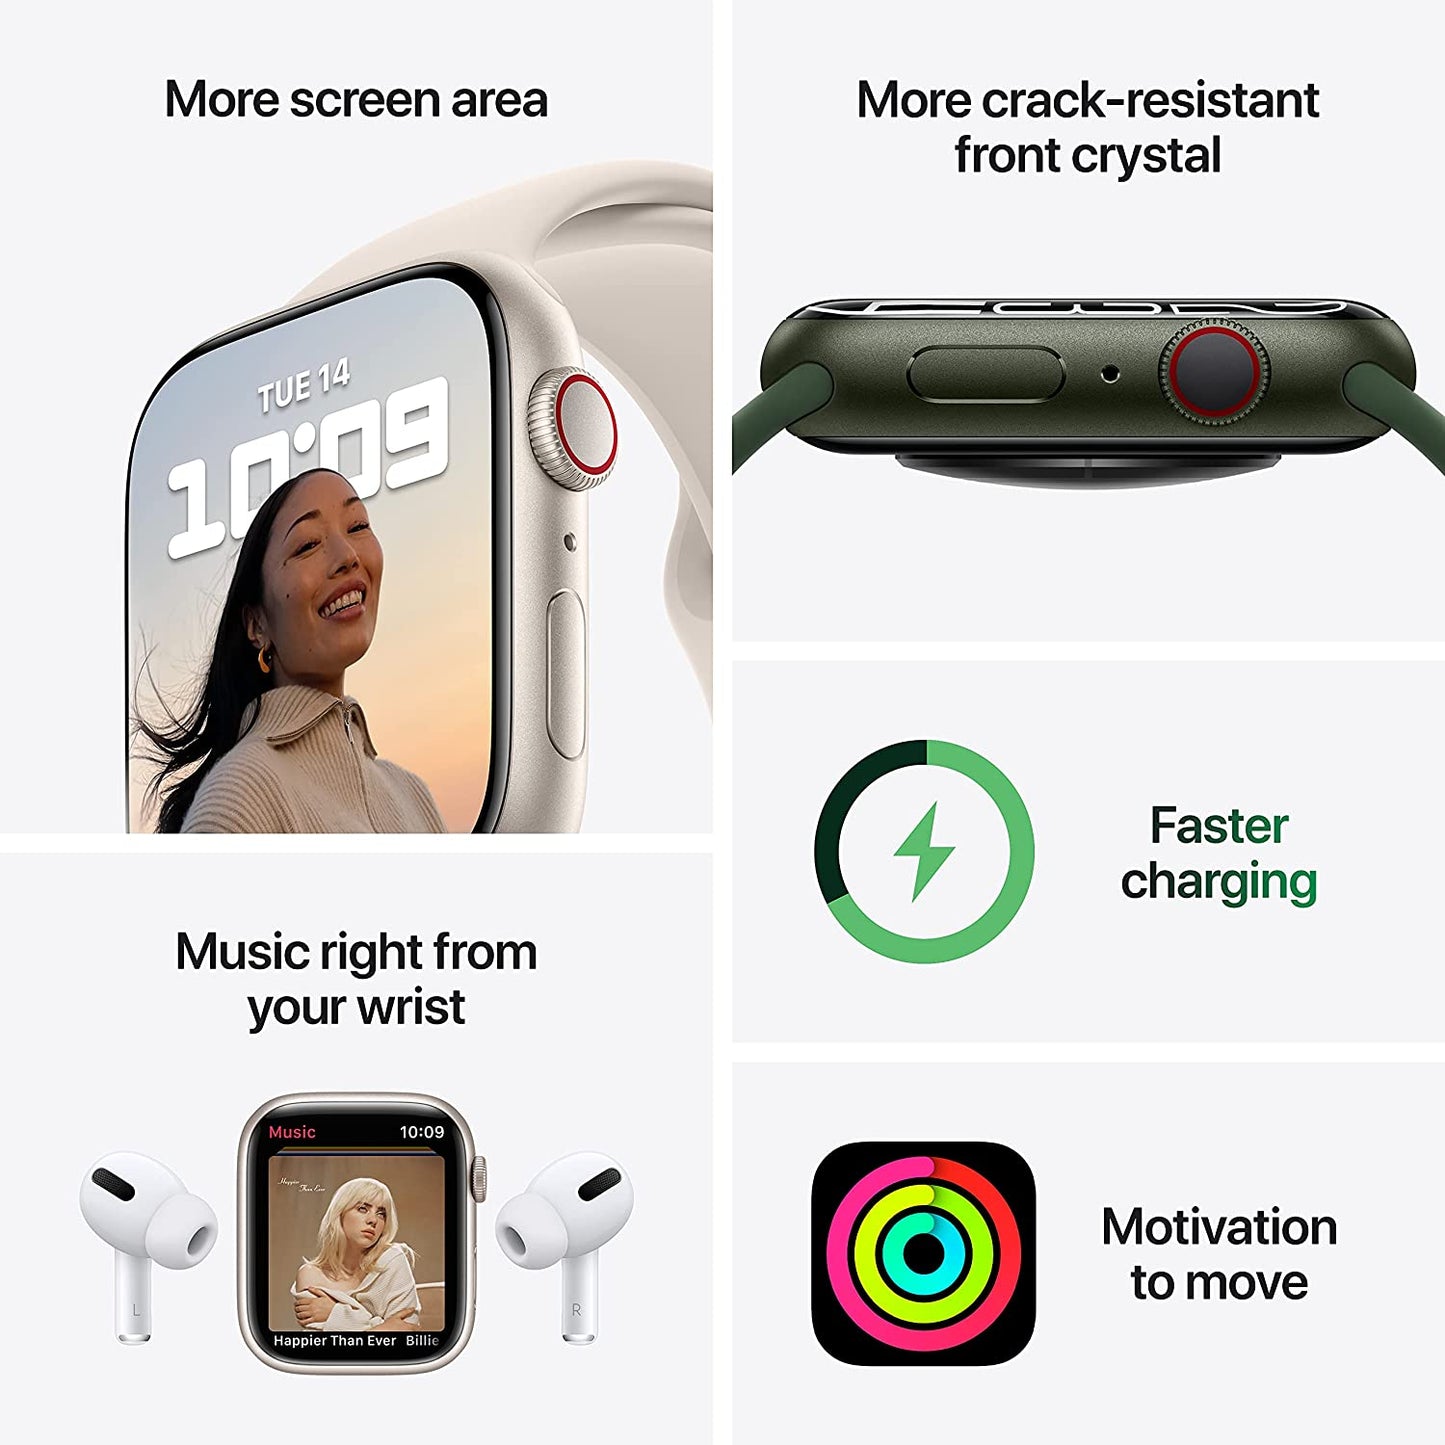 Apple Watch Series 7 GPS, 45mm Green Aluminum Case with Clover Sport Band